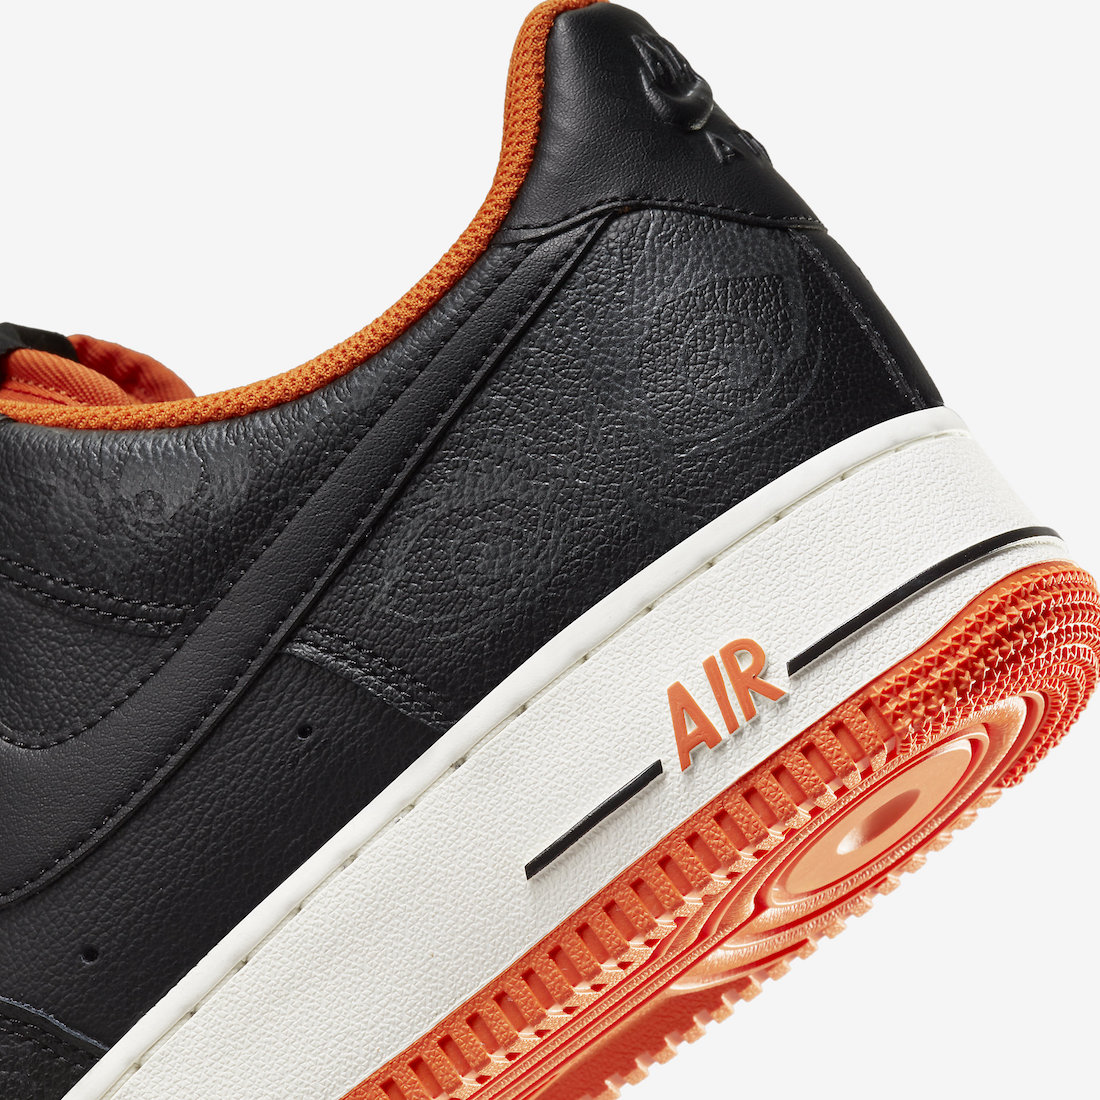 Nike-Air-Force-1-Low-Halloween-DC8891-001-2021-Release-Date-7